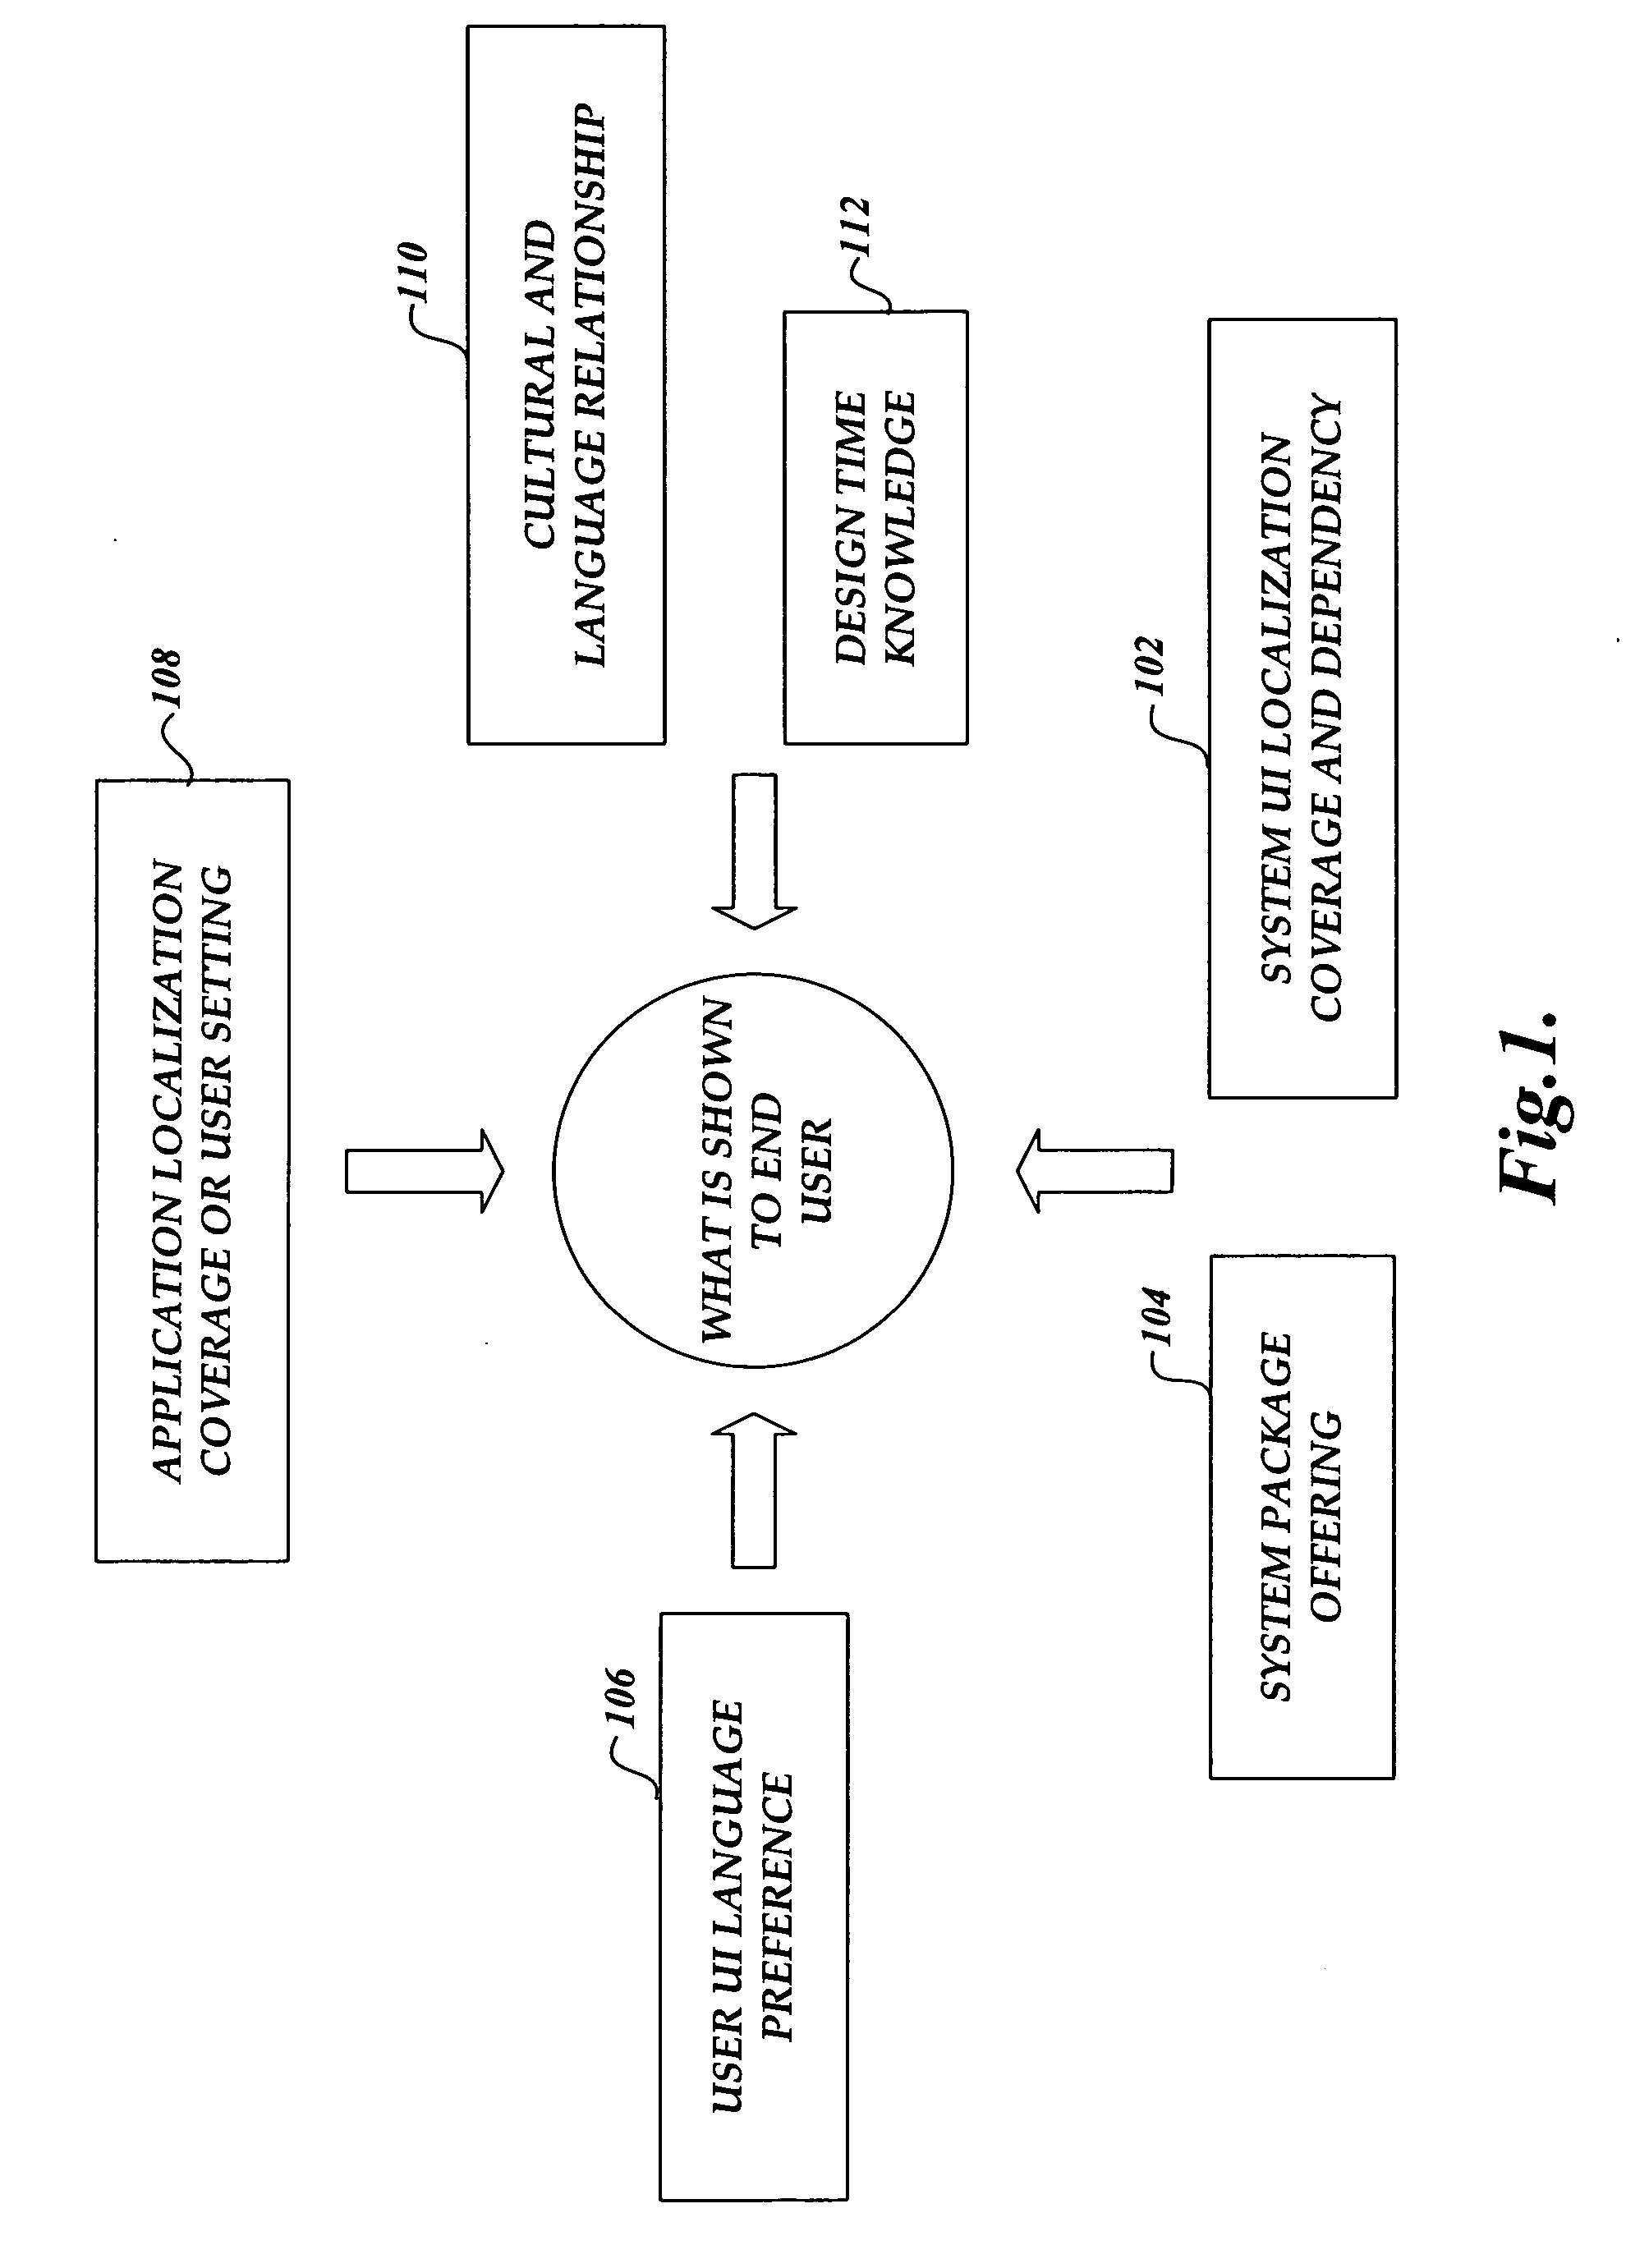 System and method for managing resource loading in a multilingual user interface operating system